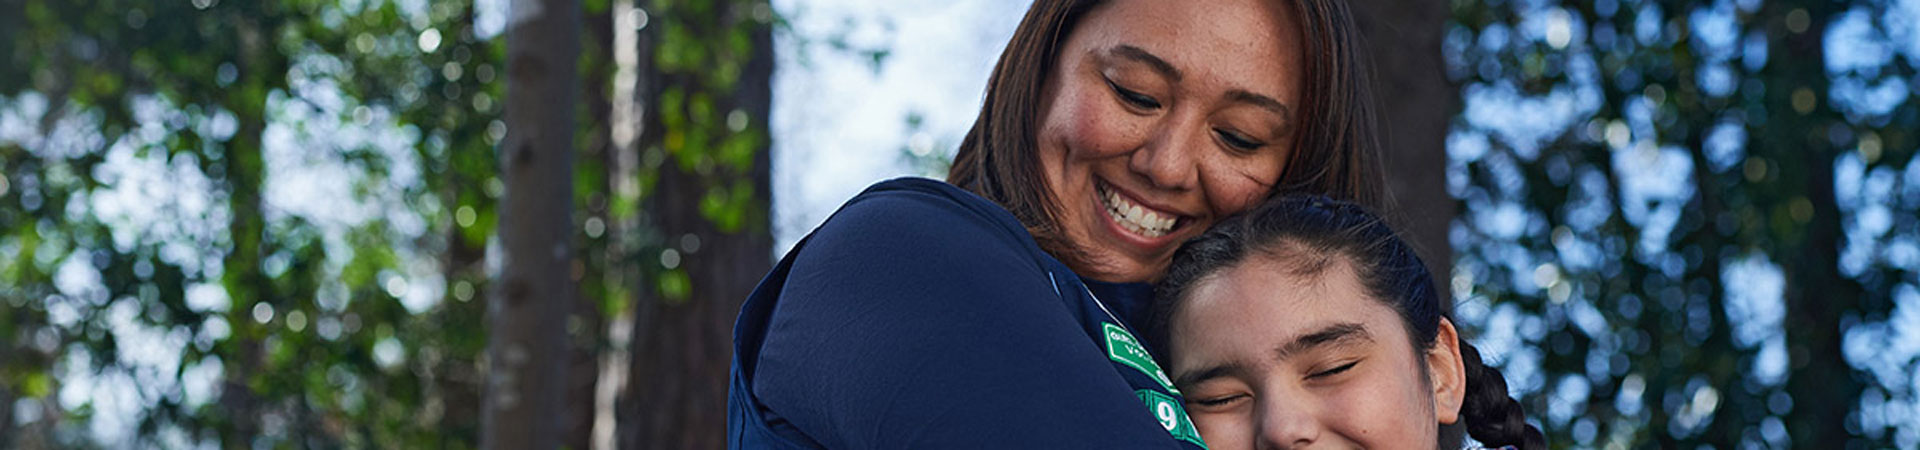  An adult volunteer in a blue vest hugging a youth Girl Scout member. They are outdoors and there are trees behind them.  